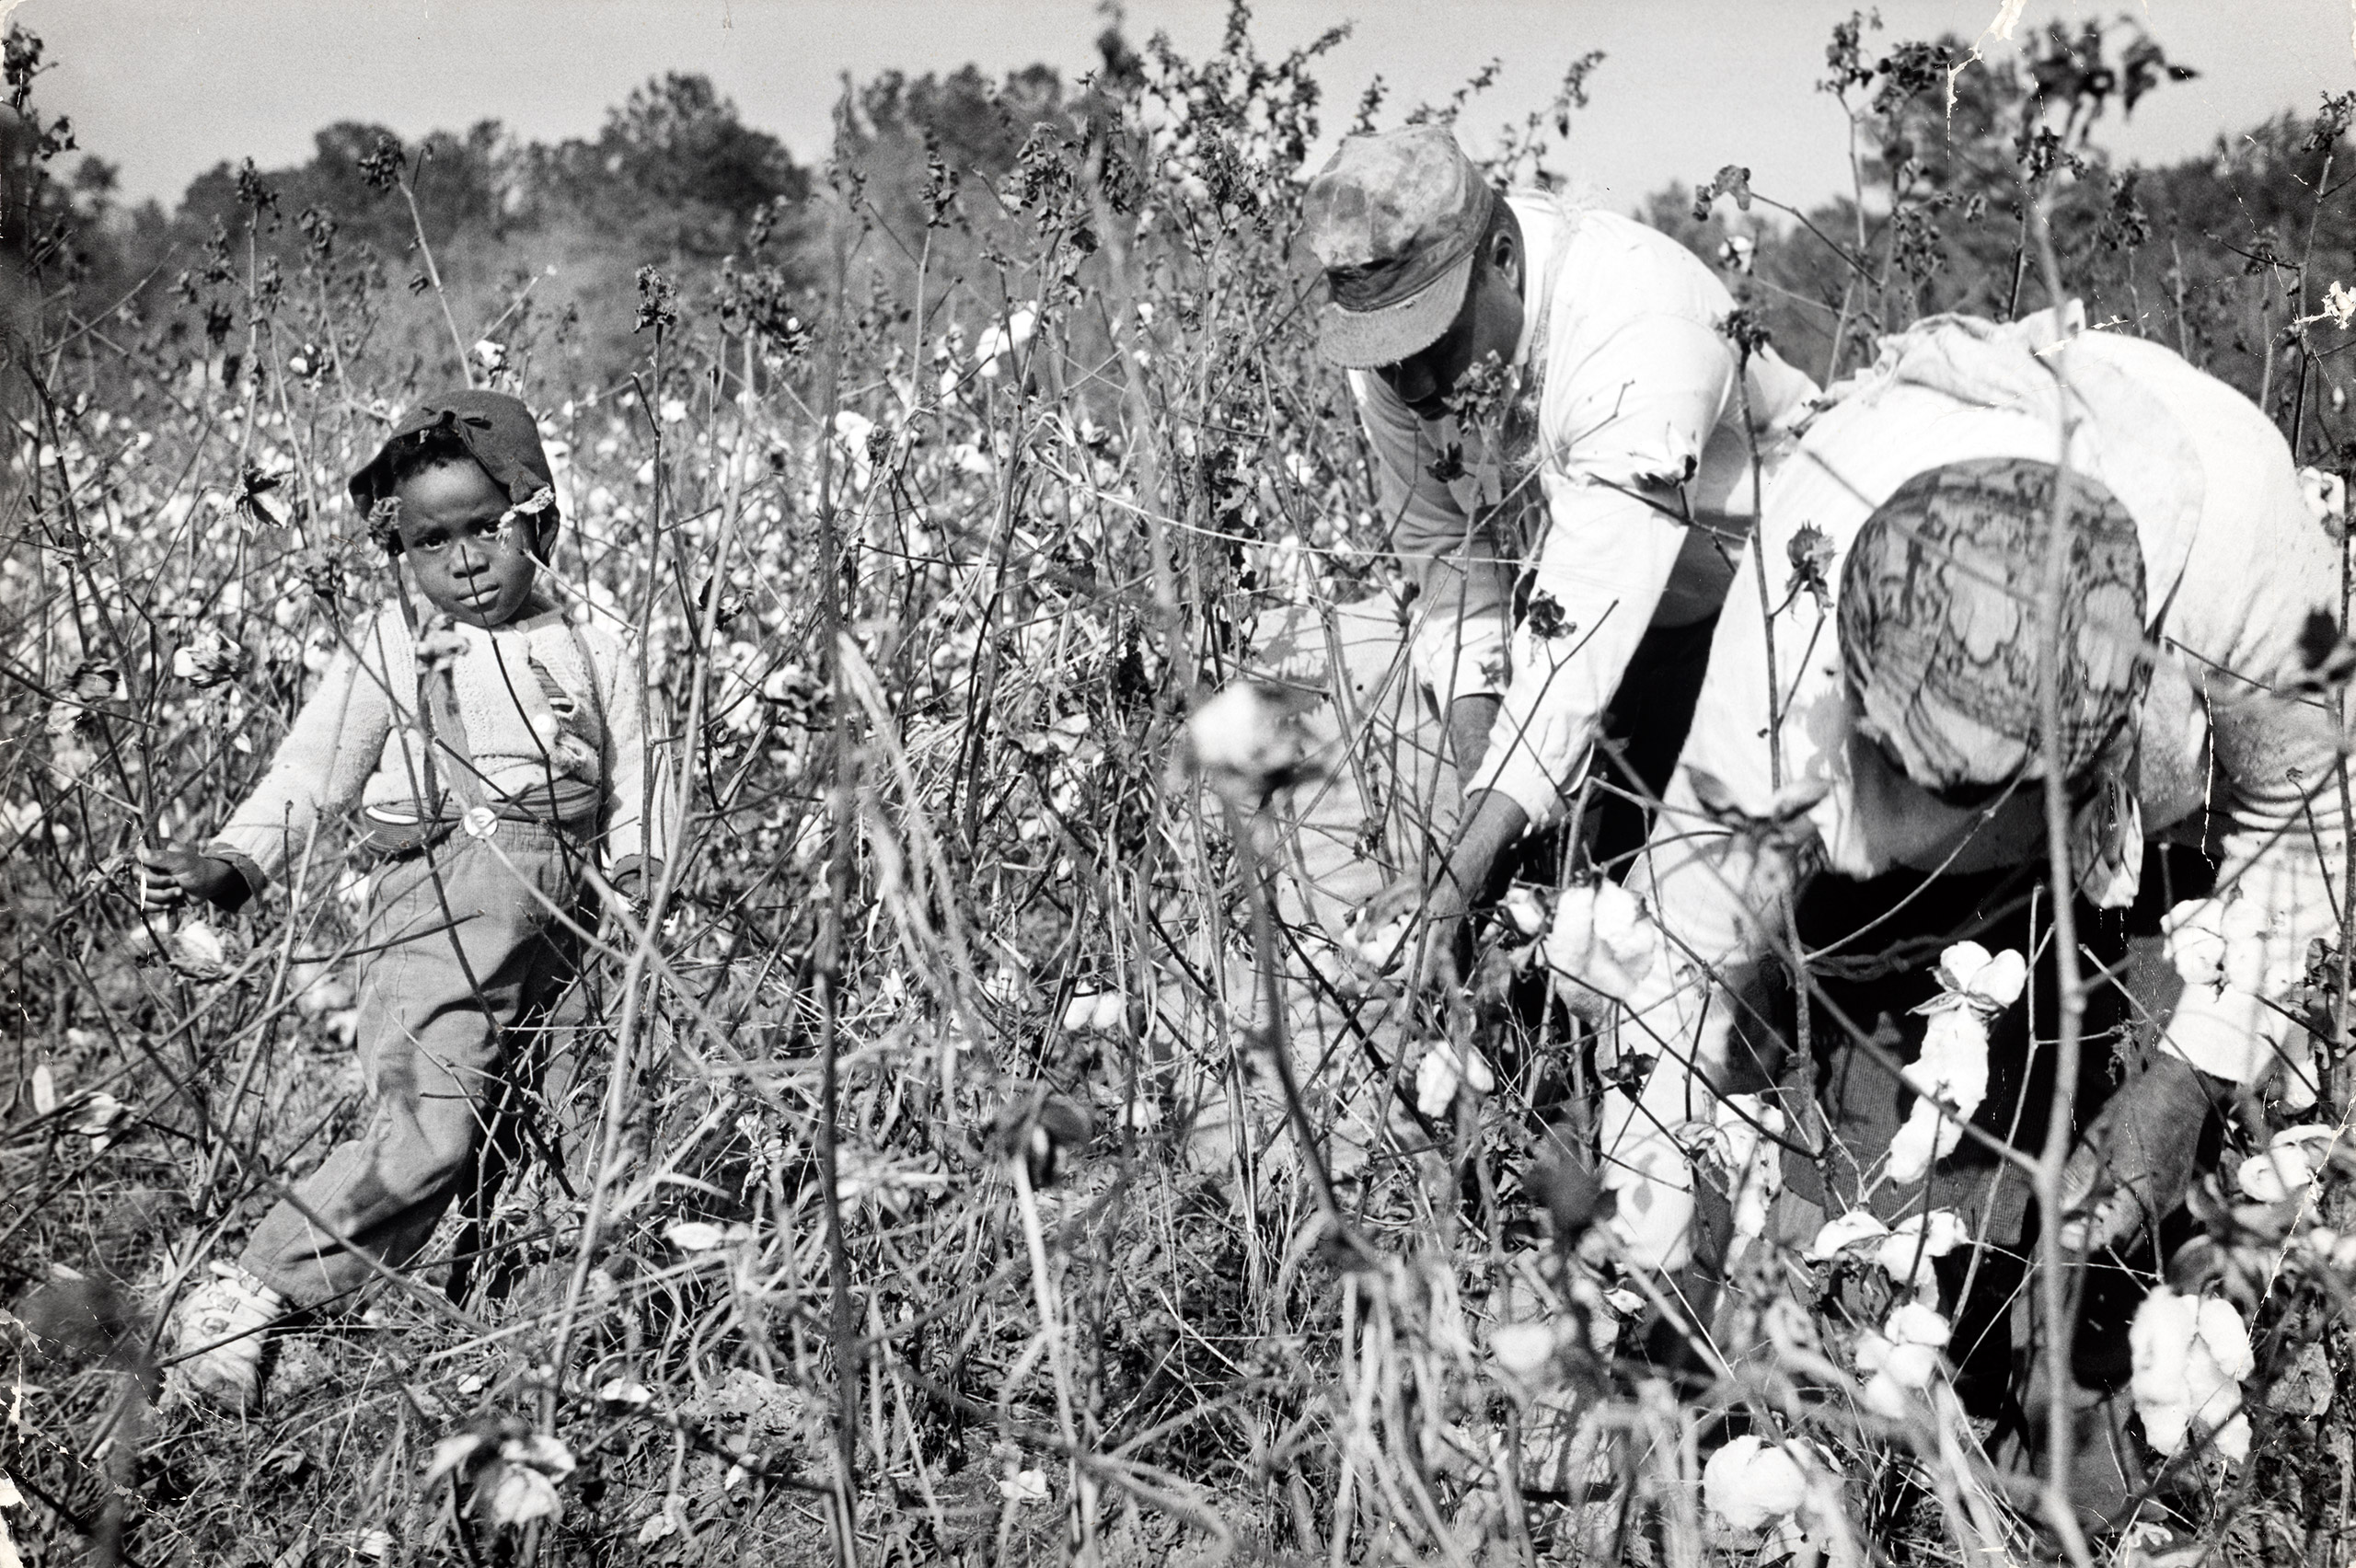 Man, woman, and child shown picking cotton in a field. Georgia, 1964.